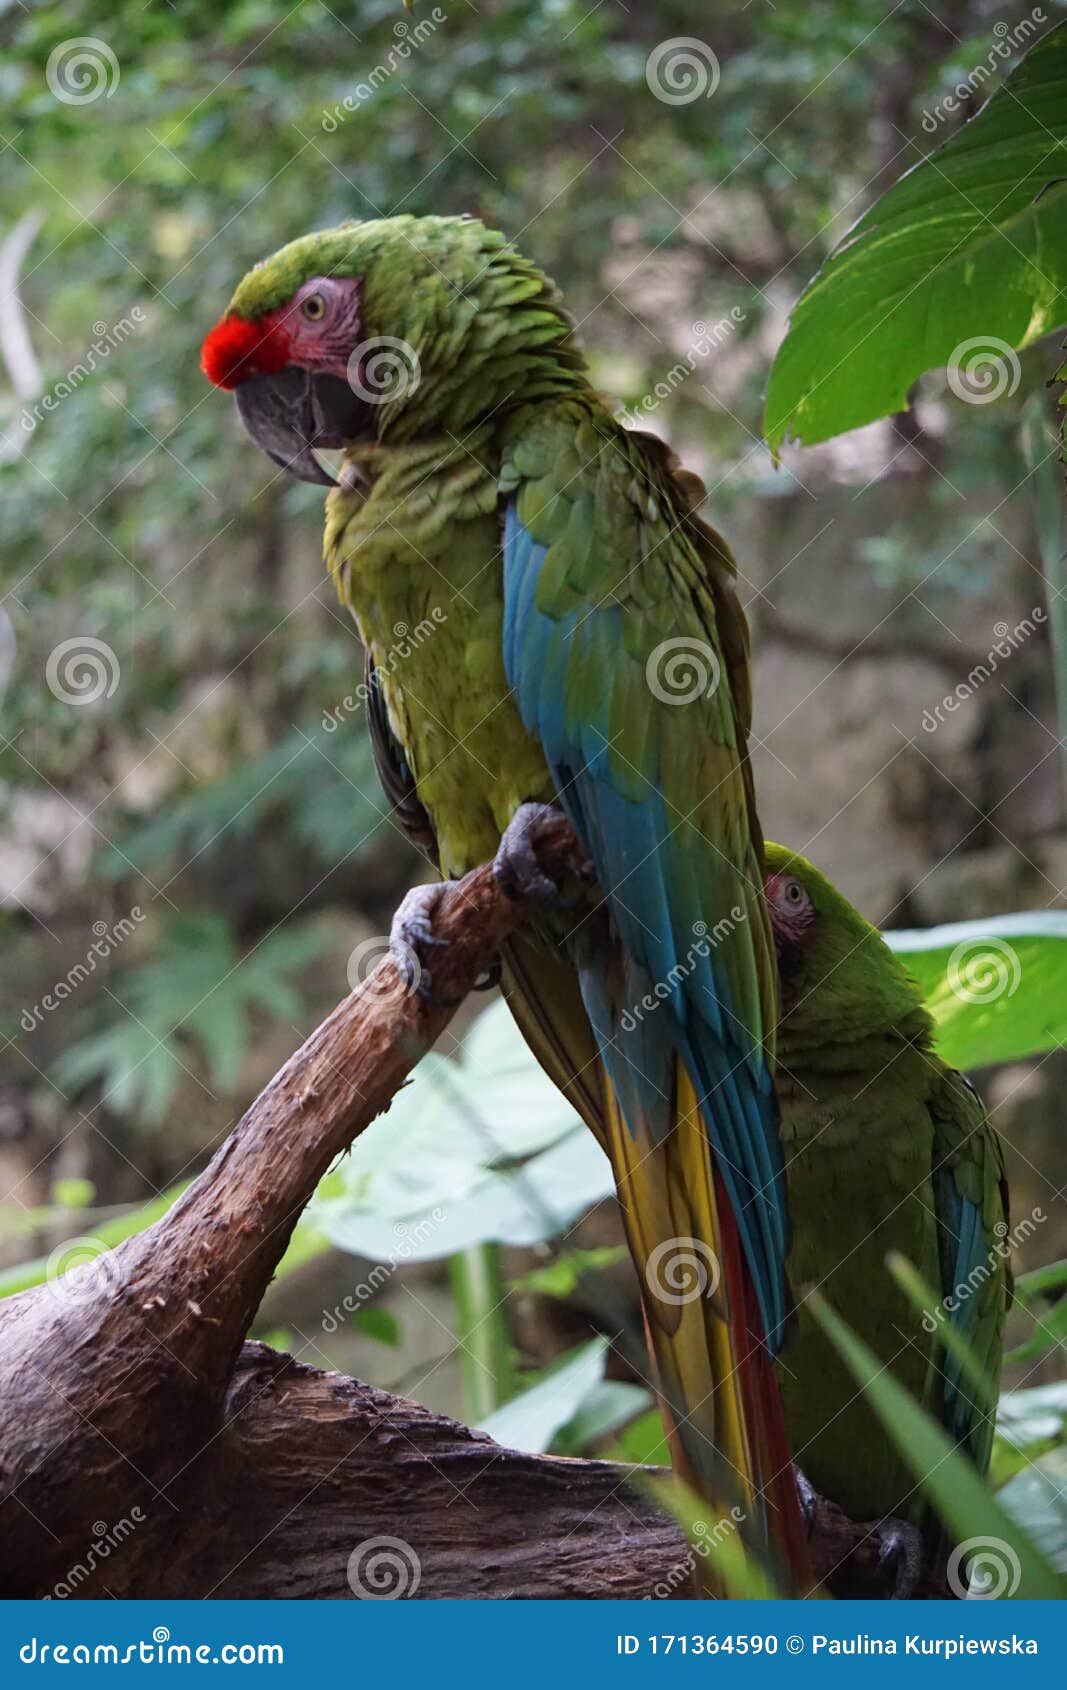 military macaw resting on a tree,tulum, mexico